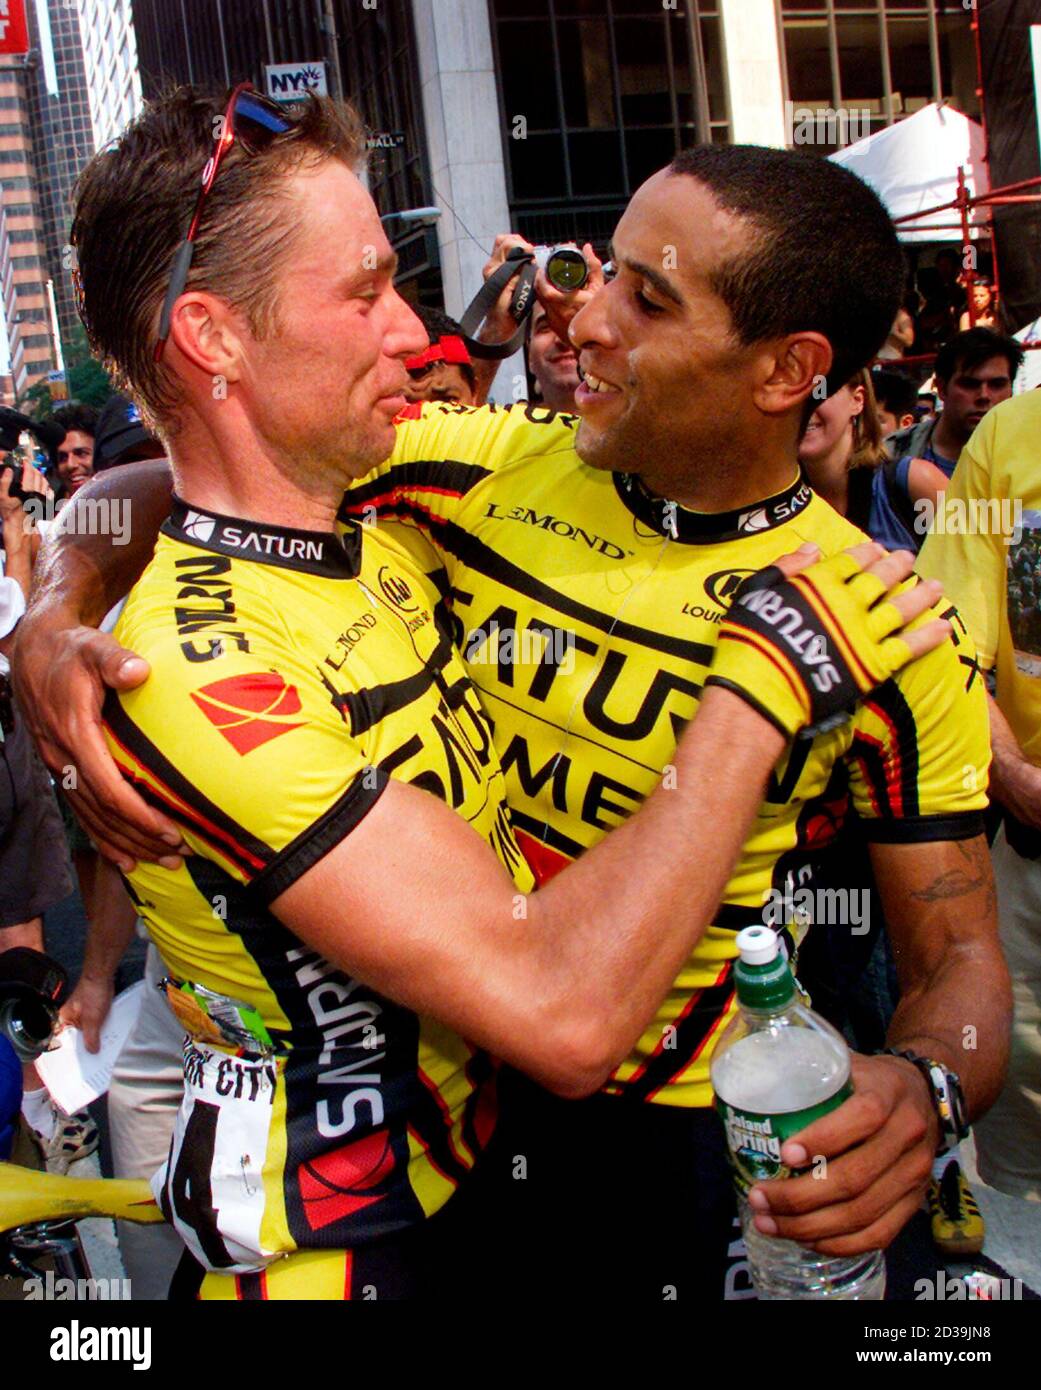 Ivan Dominguez (R) from Cuba now living in the United States, is embraced by his Saturn teammate Harm Jensen from Holland (L) after Dominguez won the first ever New York City Cycling Championship in lower Manhattan, August 4, 2002. The race was run on streets in New York's financial district. REUTERS/Mike Segar  MS Stock Photo